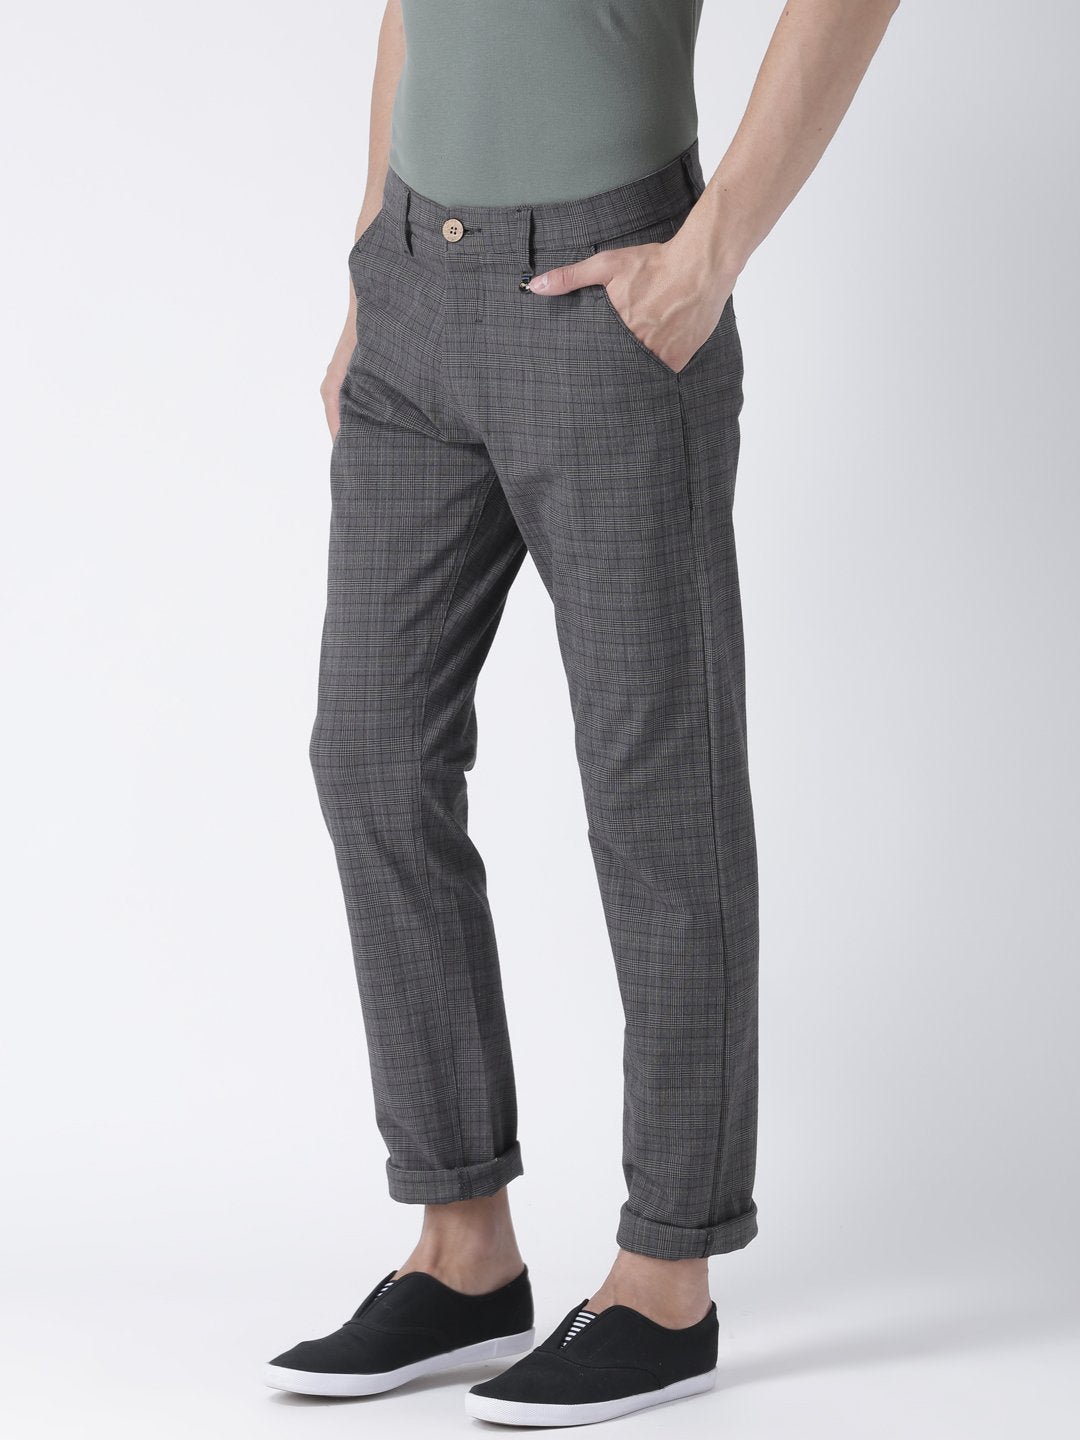 Men Relax Fit 4 Way Stretch Casual Blackwatch Pant